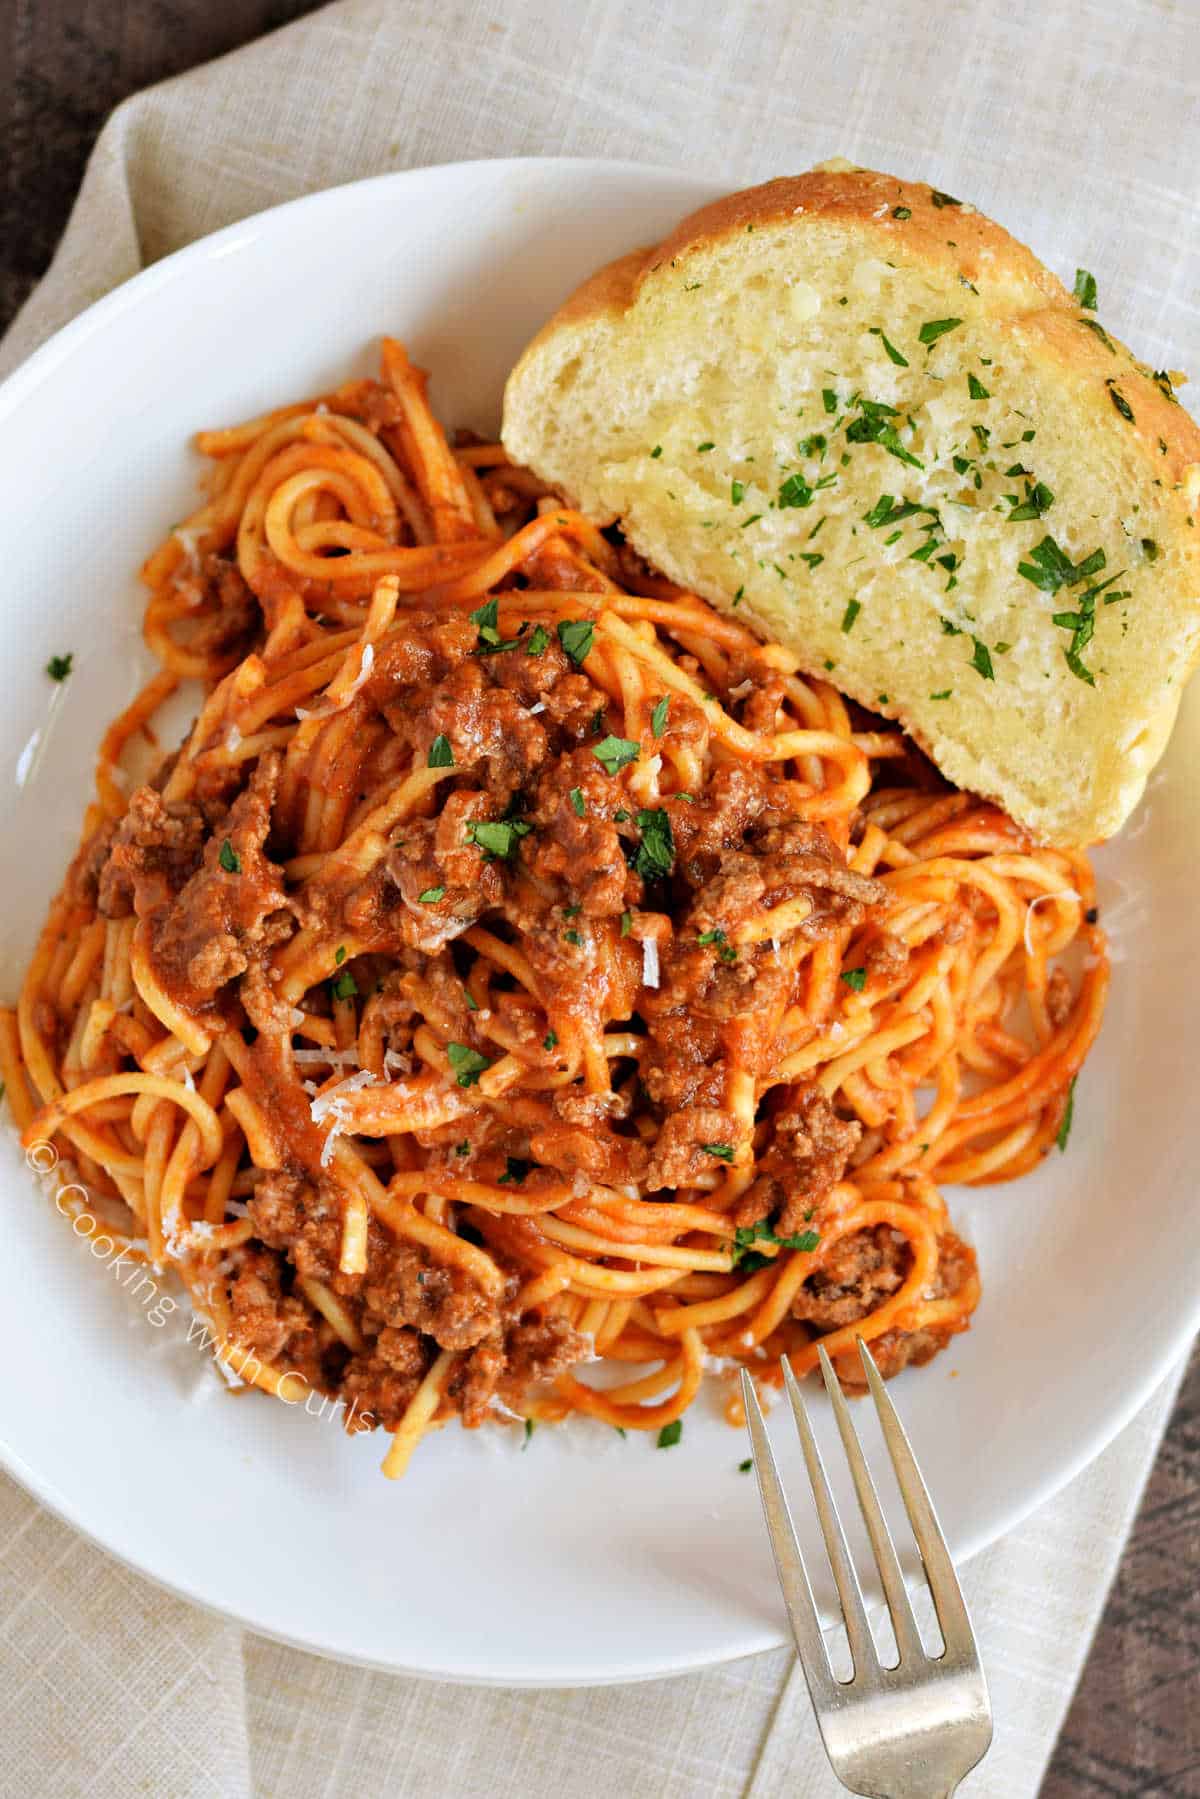 Looking down on a plate of Instant Pot Spaghetti with meat sauce and garlic bread on the side.